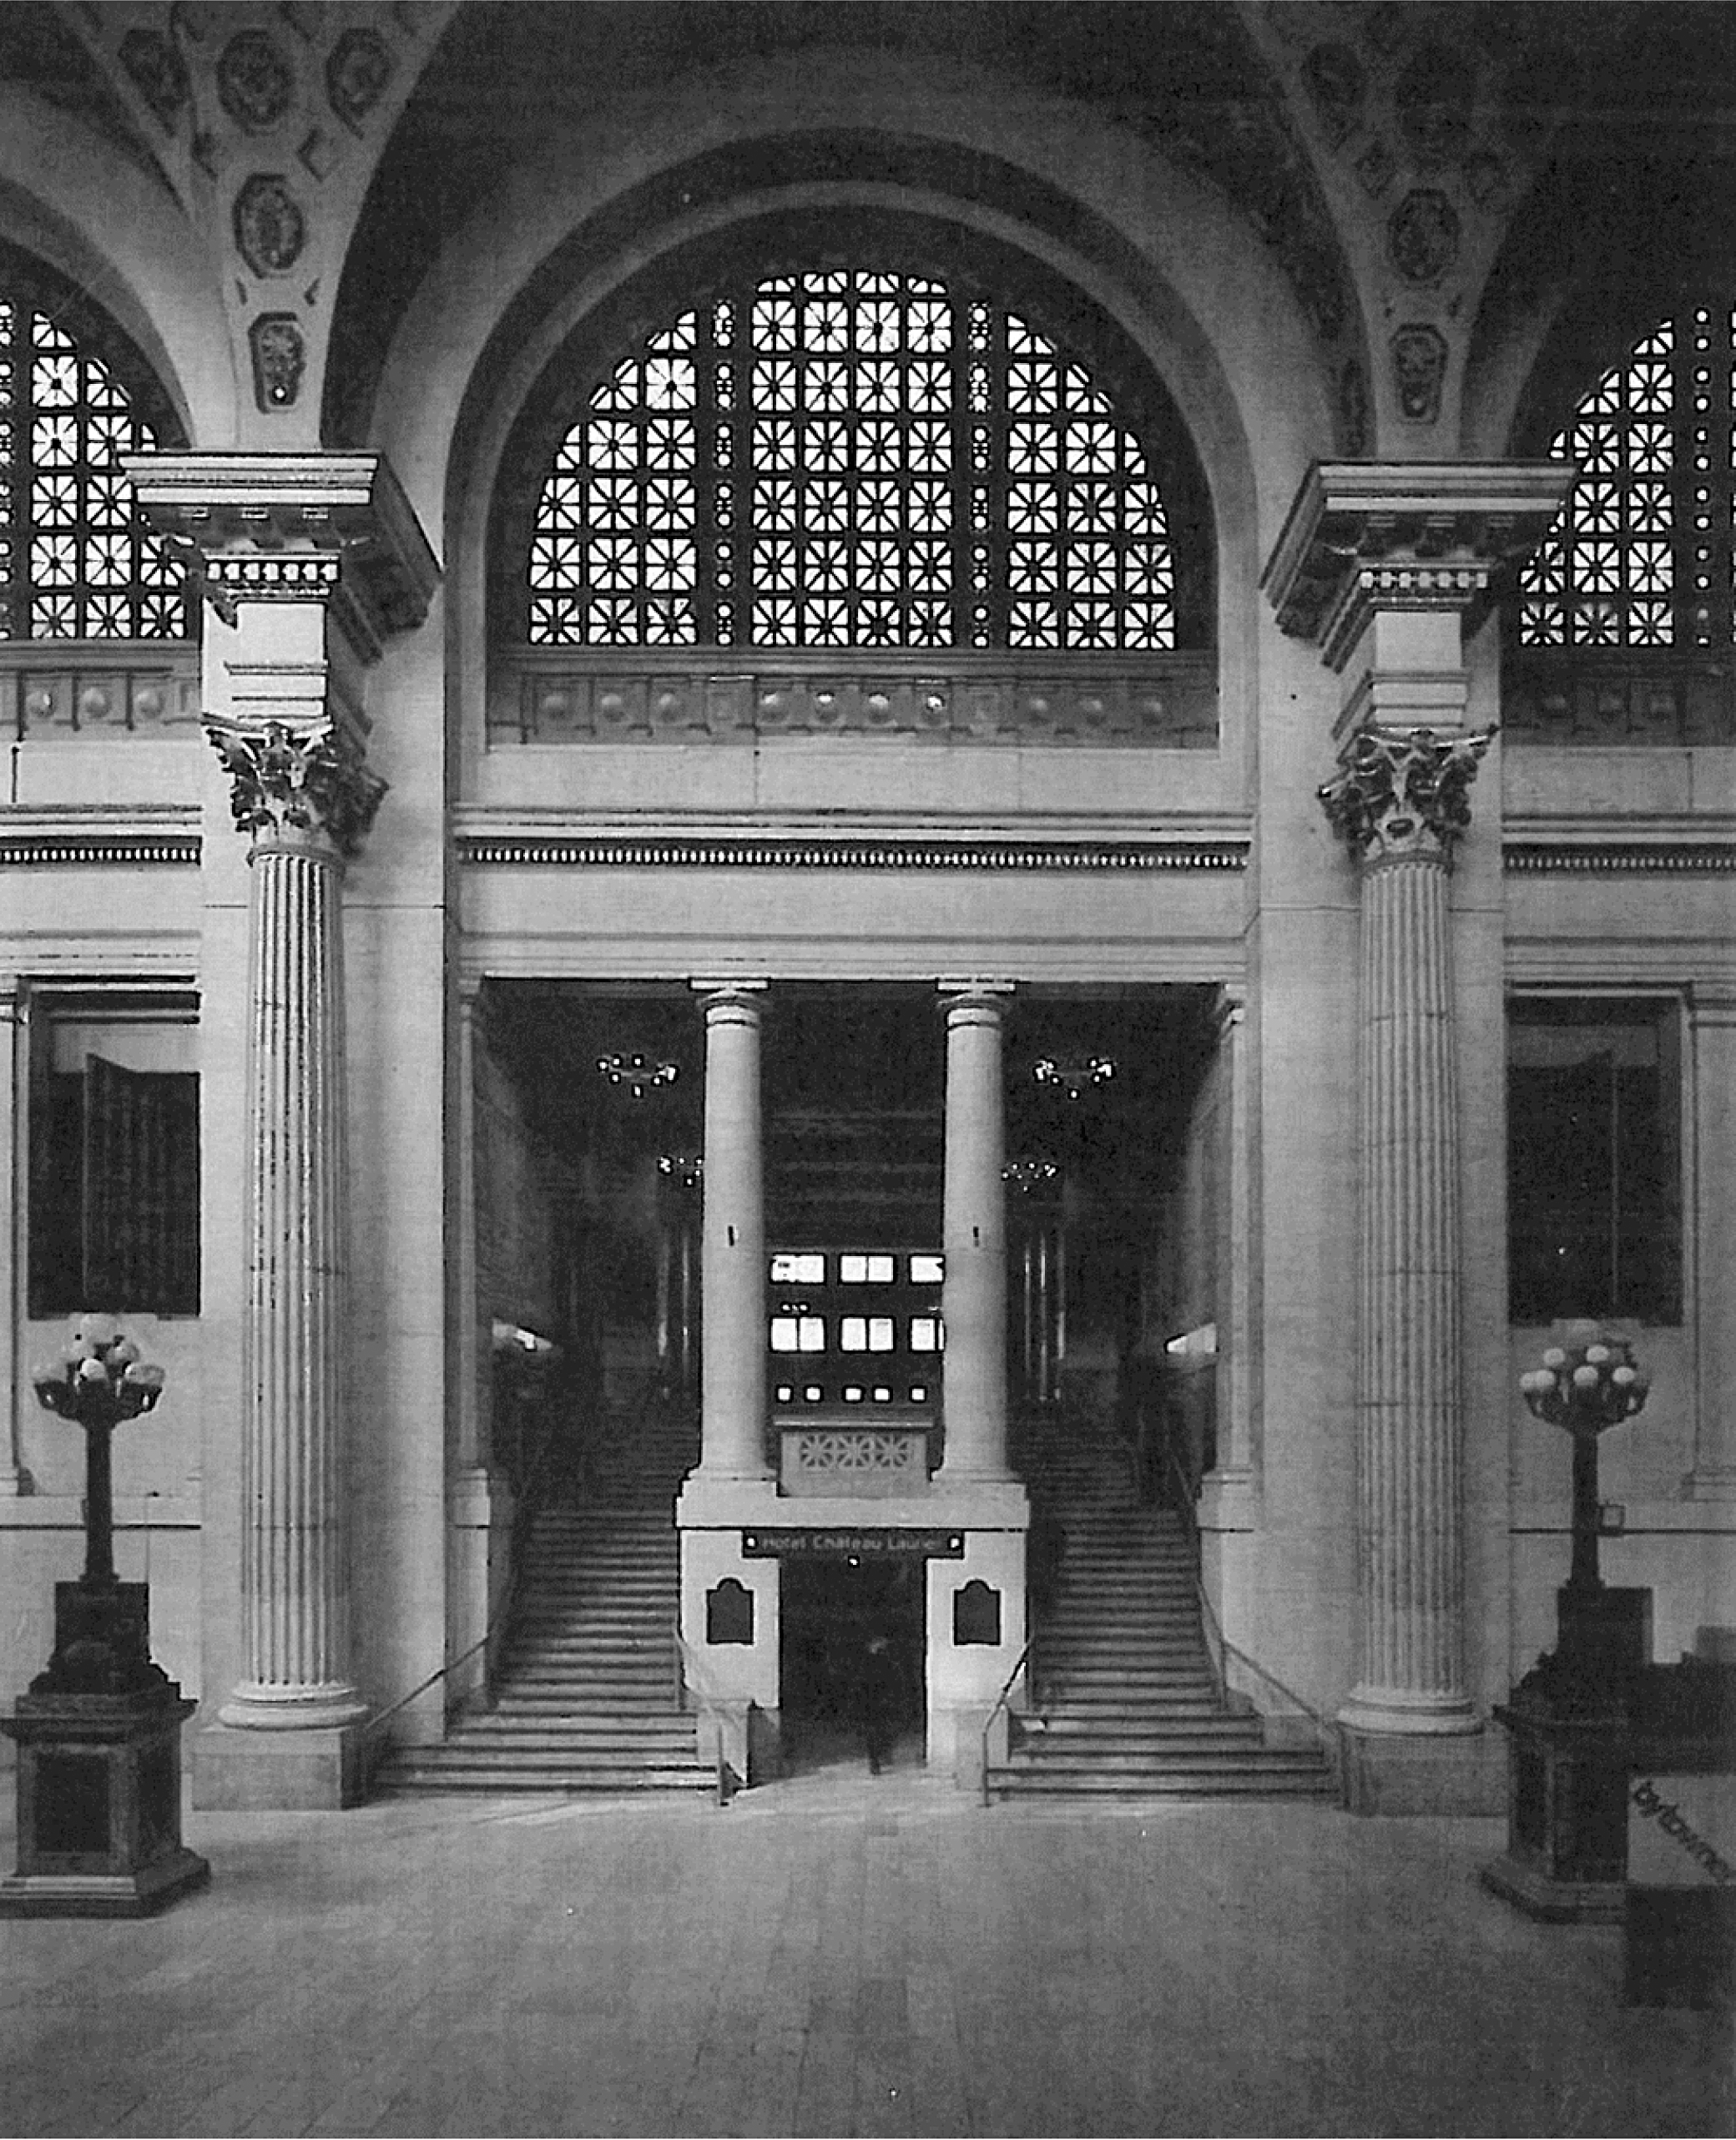 Many of the original architectural features of the Government Conference Centre, originally constructed in 1912 as Ottawa’s train station, are being painstakingly restored. The Senate of Canada is scheduled to occupy the historic building for 10 years, beginning in September 2018. (Library and Archives Canada)